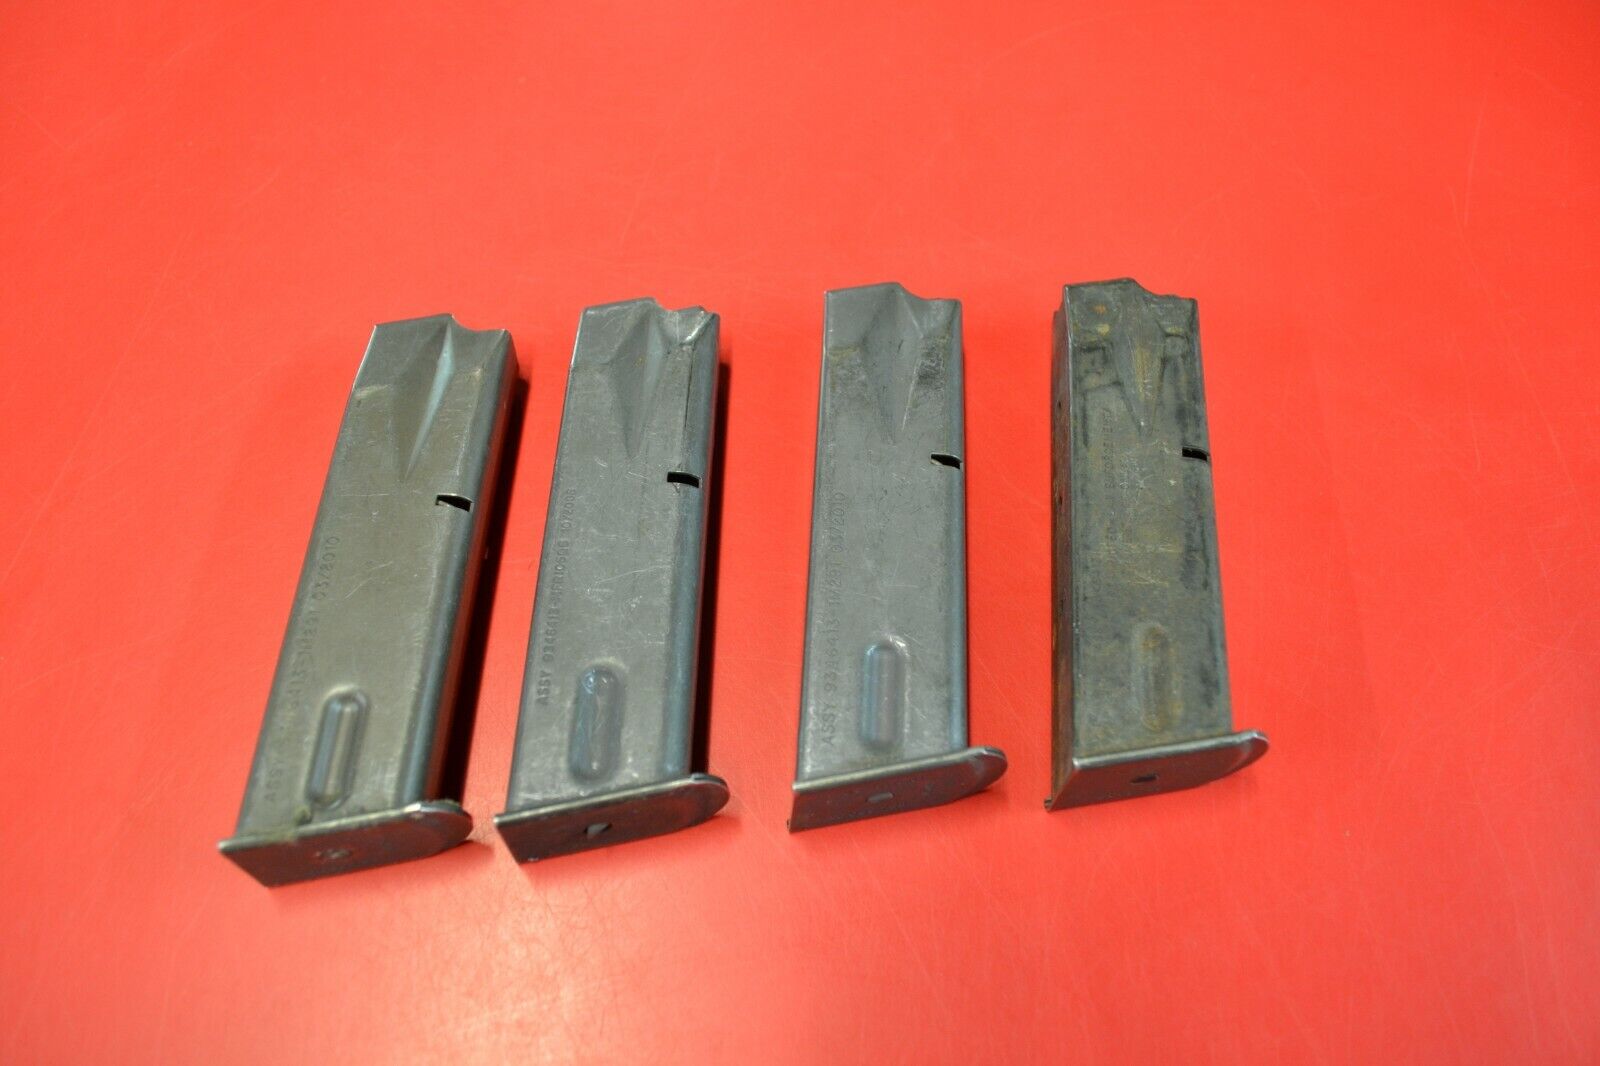 Beretta 92FS Check-Mate Magazine Lot of 4 Check-Mate Does Not Apply